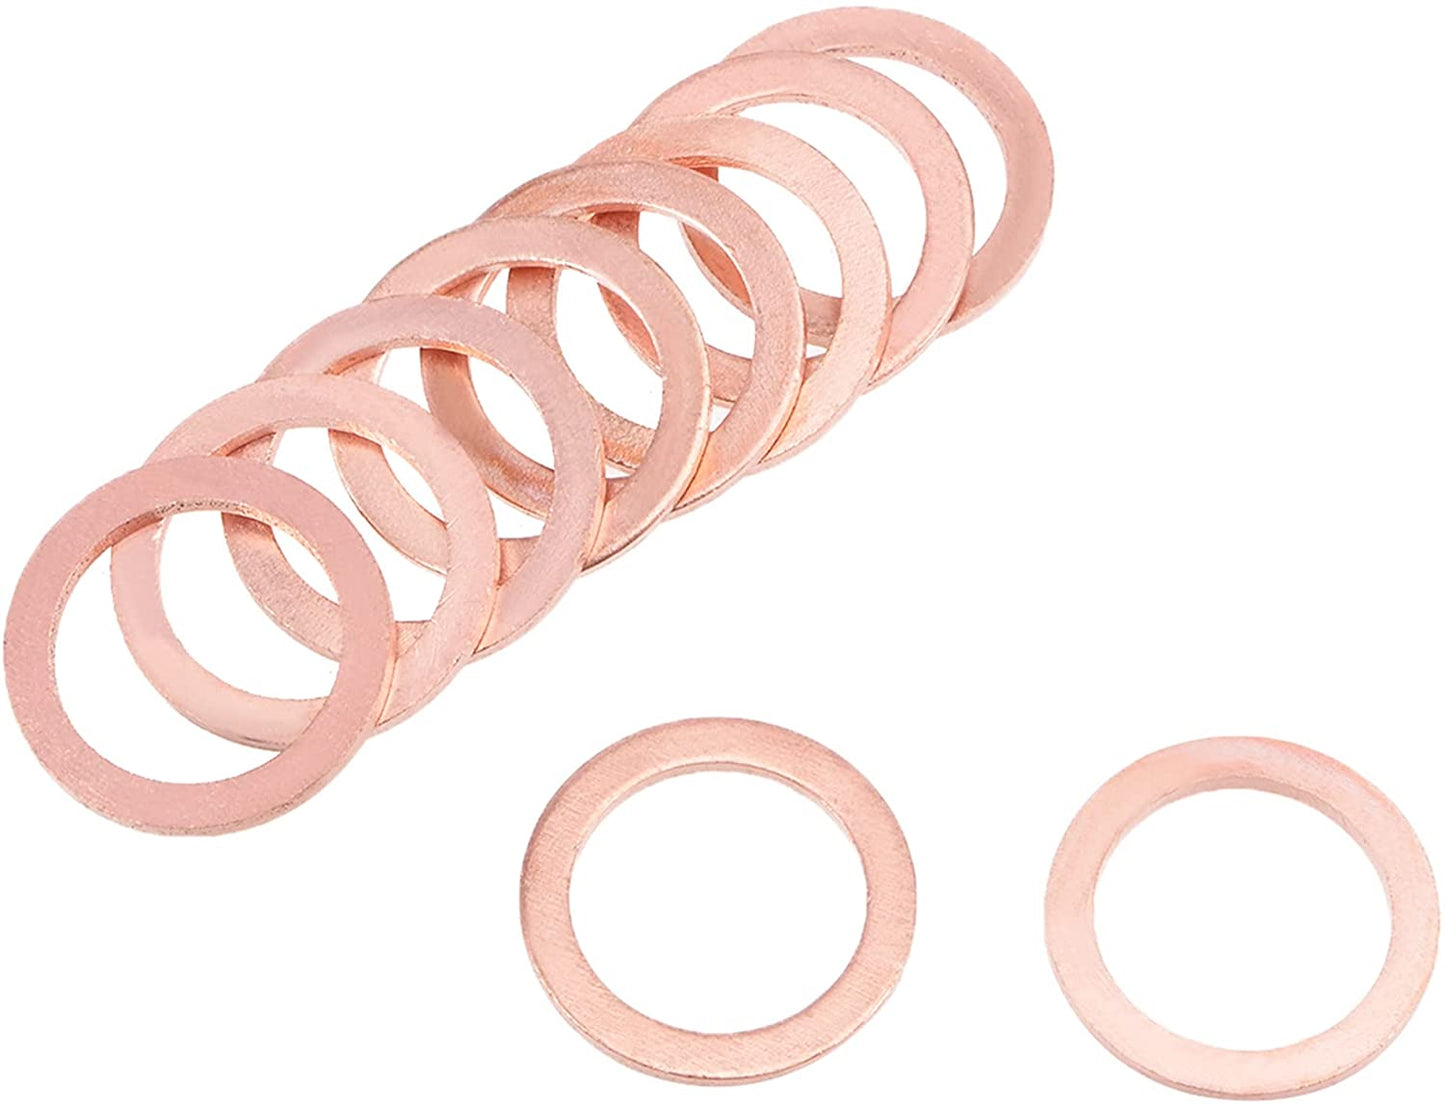 200pcs Metric M16x22x1.5mm Copper flat washer gasket Copper crush washer Sealing Ring for Screw Bolt Nut